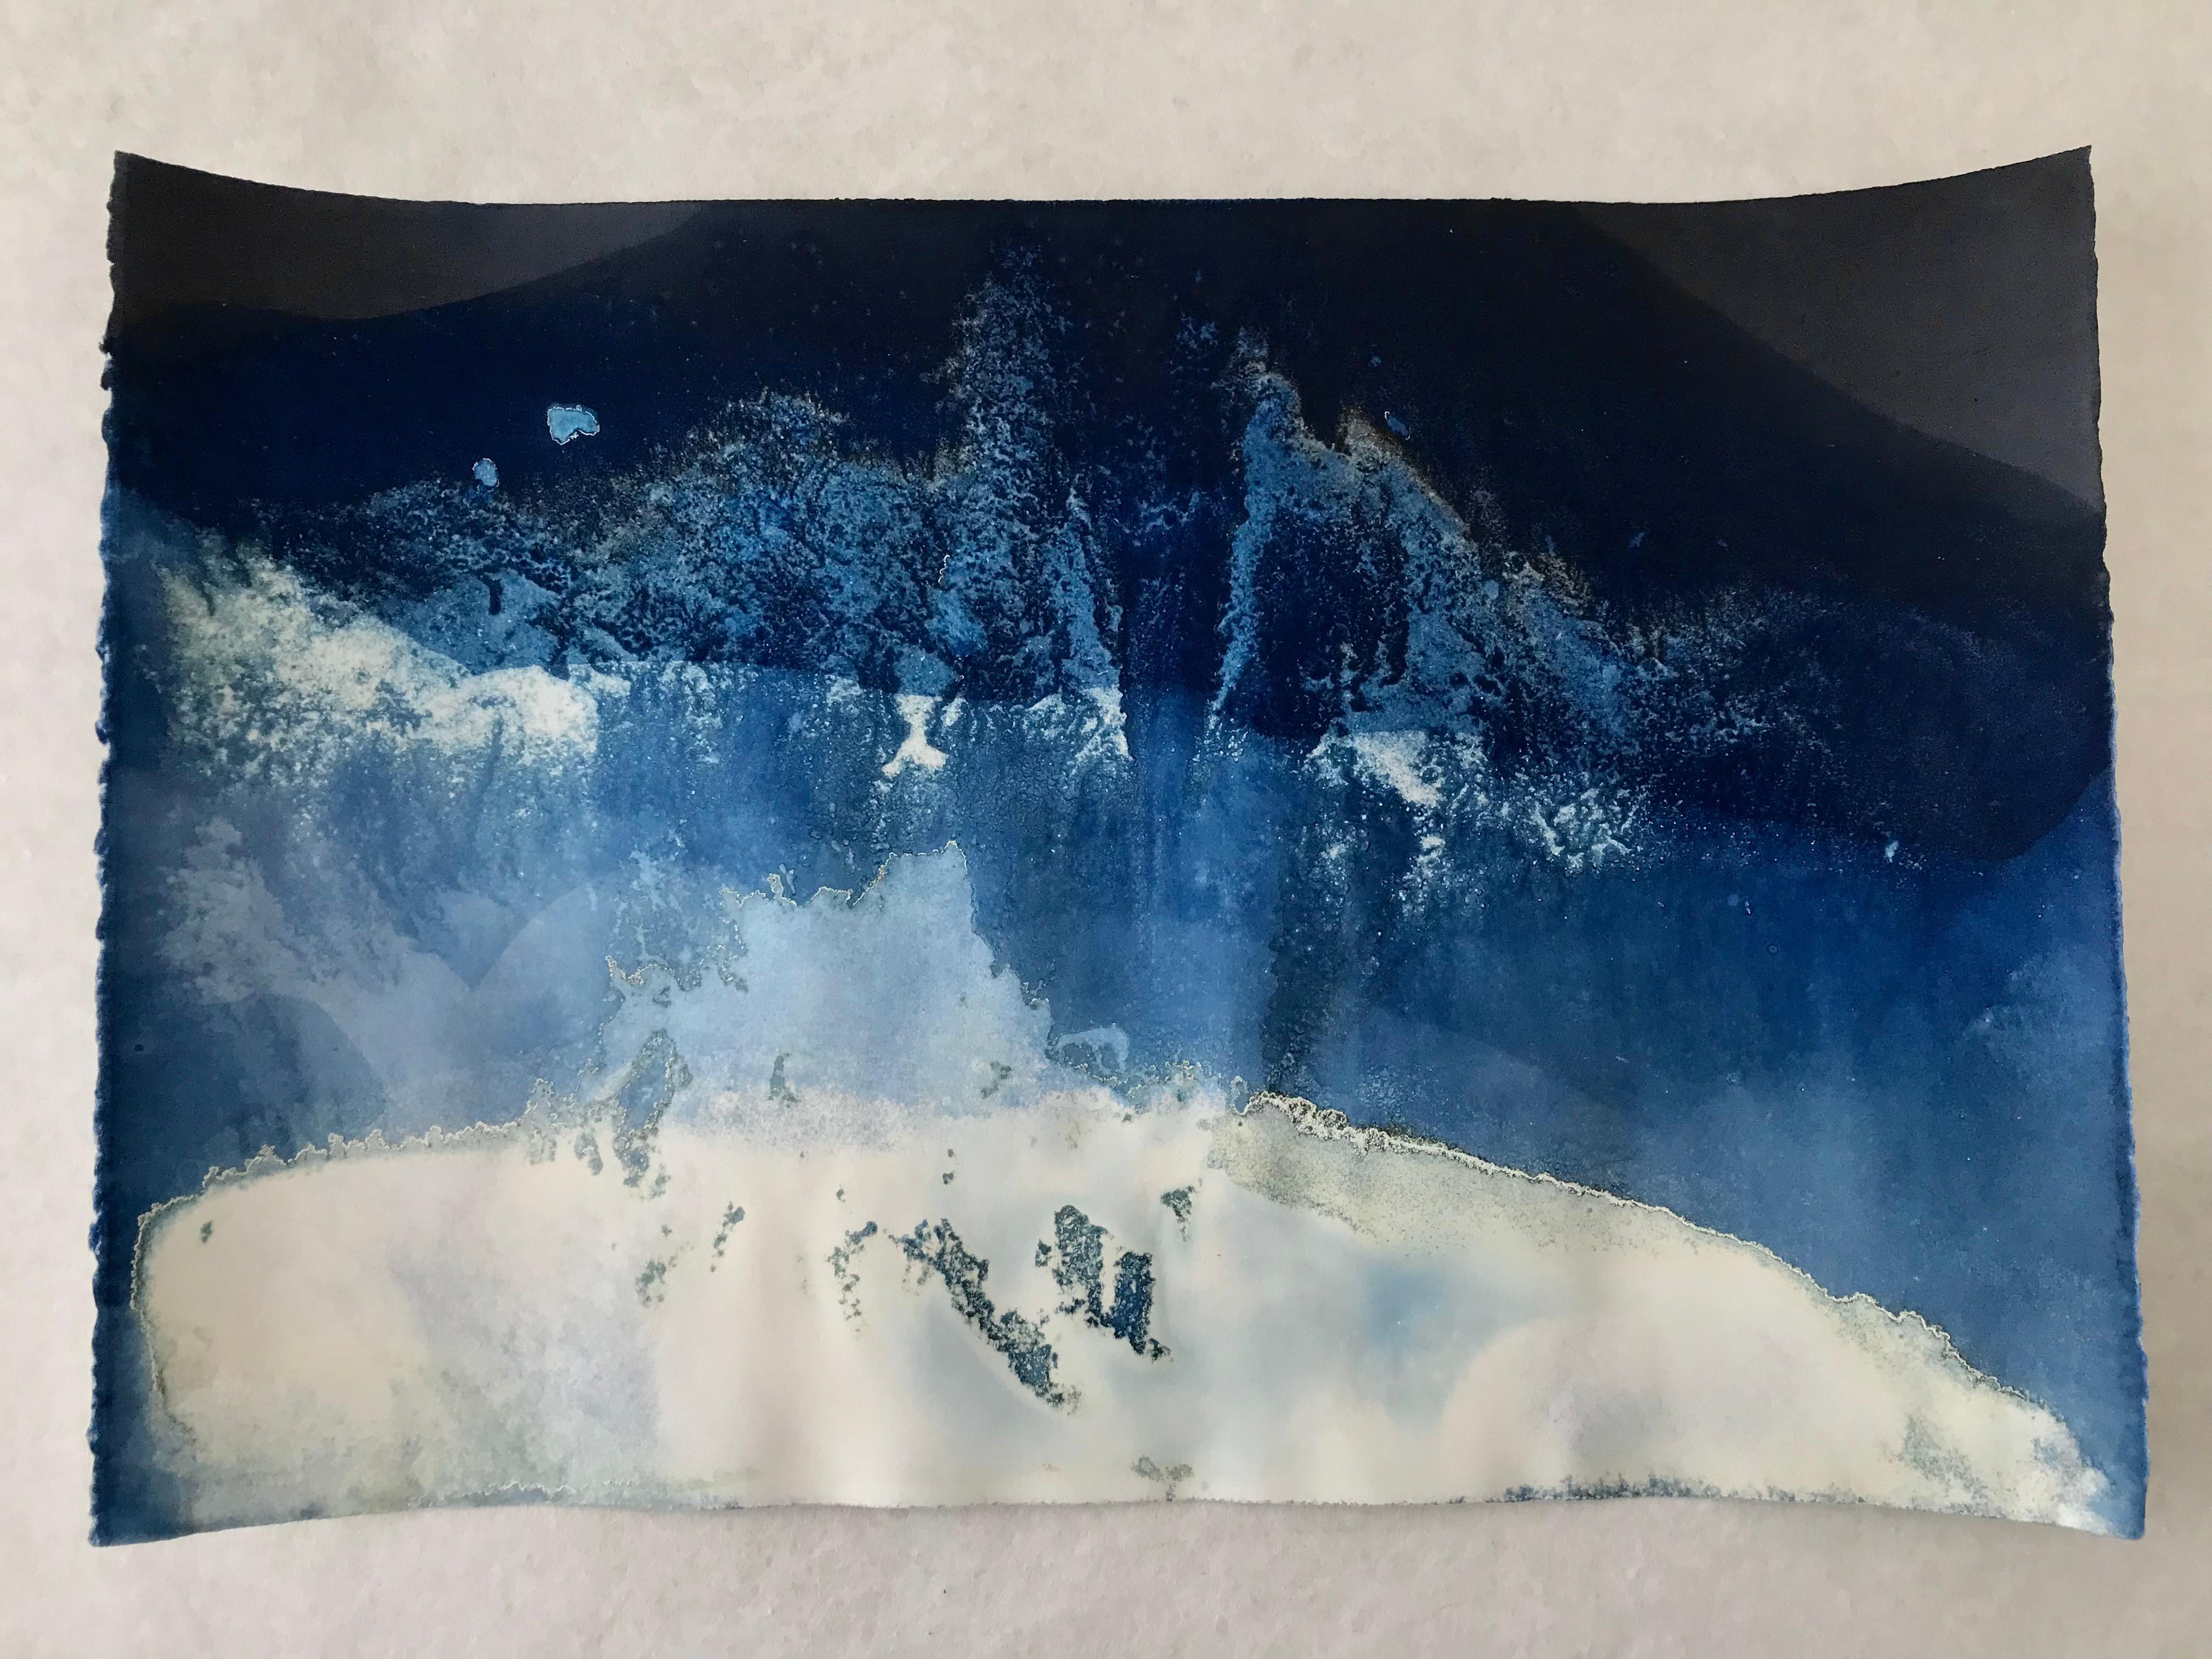 28° 14' 20.922'' N, 114° 6' 9.395'' W-8. Cyanotype photograph of the ocean waves - Abstract Photograph by Paola Davila